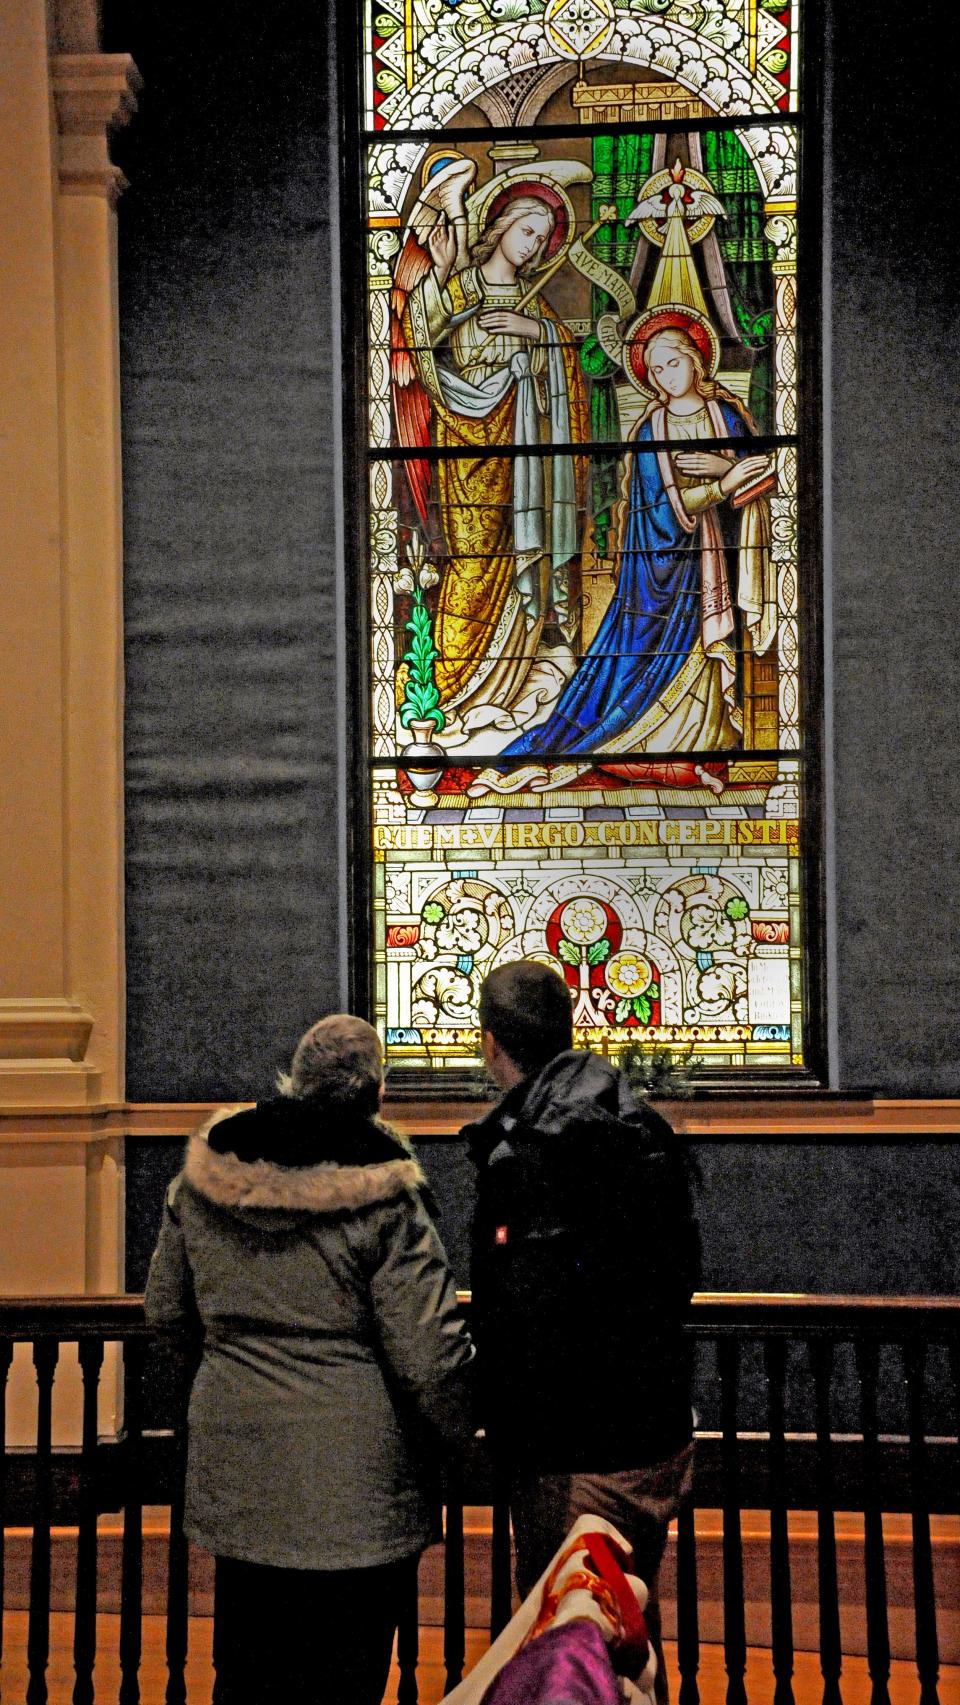 These visitors checked out the stained glass window display at St. Mary of the Immaculate Conception.